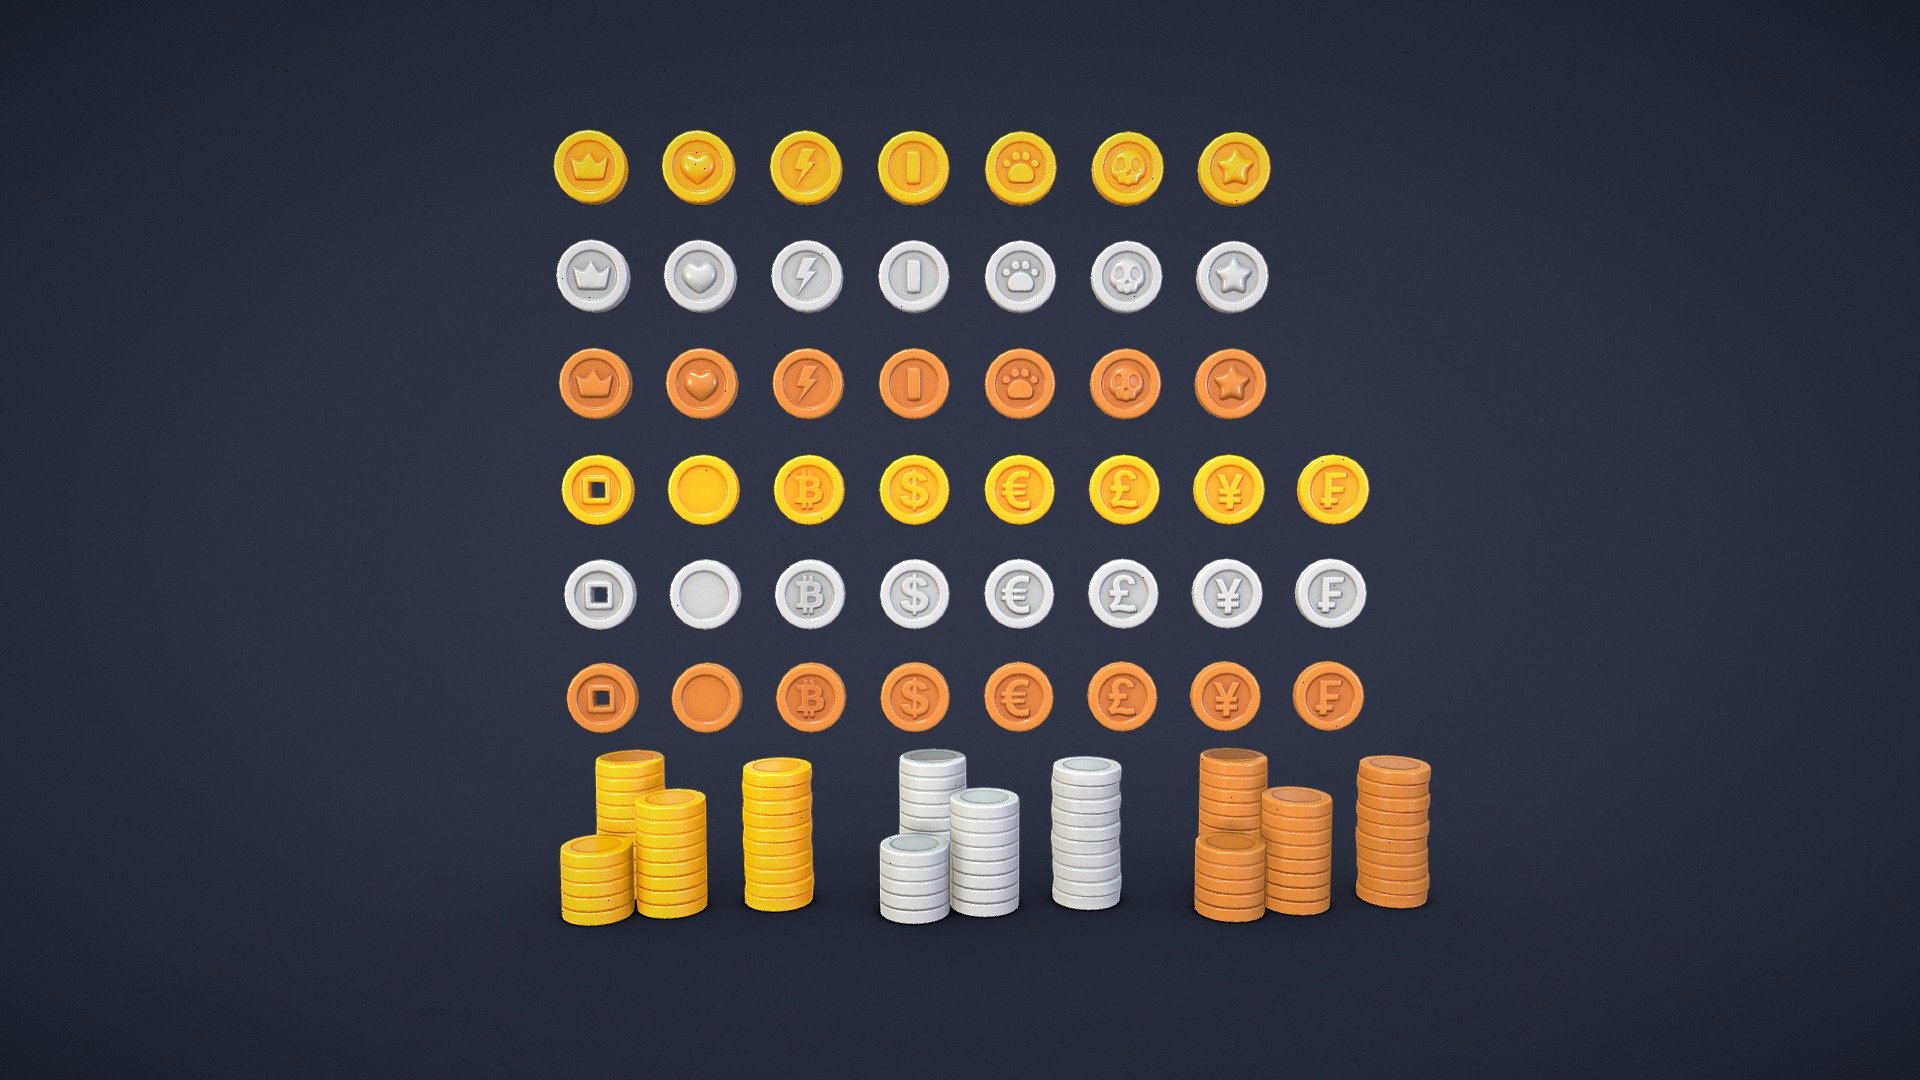 Pack of 57 models of gold, silver and bronze Coin

Pack include:




3 Coin

3 Bitcoin

3 Chinese Coin

3 Crown Coin

3 Dollar Coin

3 Euro Coin

3 Franc Coin

3 Heart Coin

3 Lightning Coin

3 Mario Coin

3 Paw Coin

3 Pound Coin

3 Skull Coin

3 Yen Coin

3 Pile of 5 Coin

3 Pile of 8 Coin

3 Pile of 10 Coin

Diffuse, Normal and Roughness textures

2048 x 2048 PNG textures

The models are between 160 and 1 240 tris

AR / VR / Mobile ready - Coin Pack - Buy Royalty Free 3D model by Andrii Sedykh (@andriisedykh) 3d model